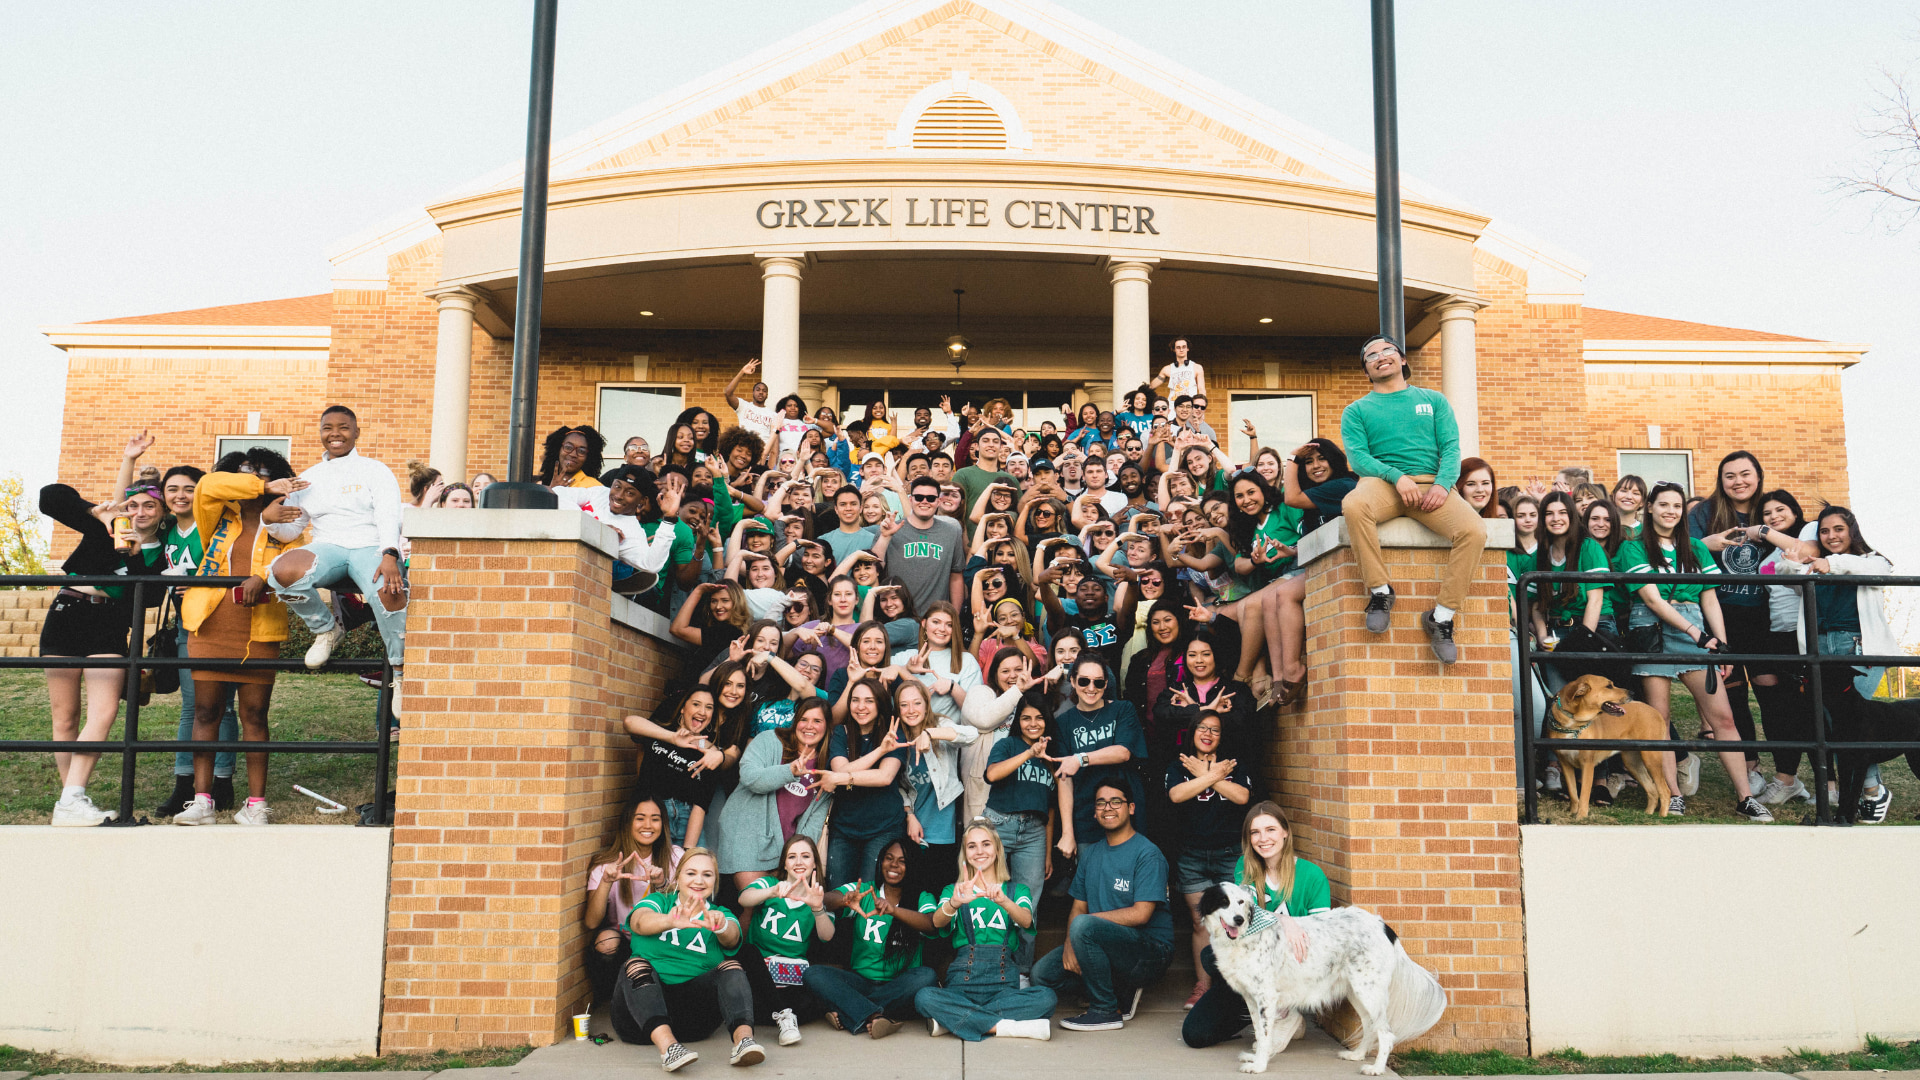 Students posing outside of the Greek Life Center, smiling